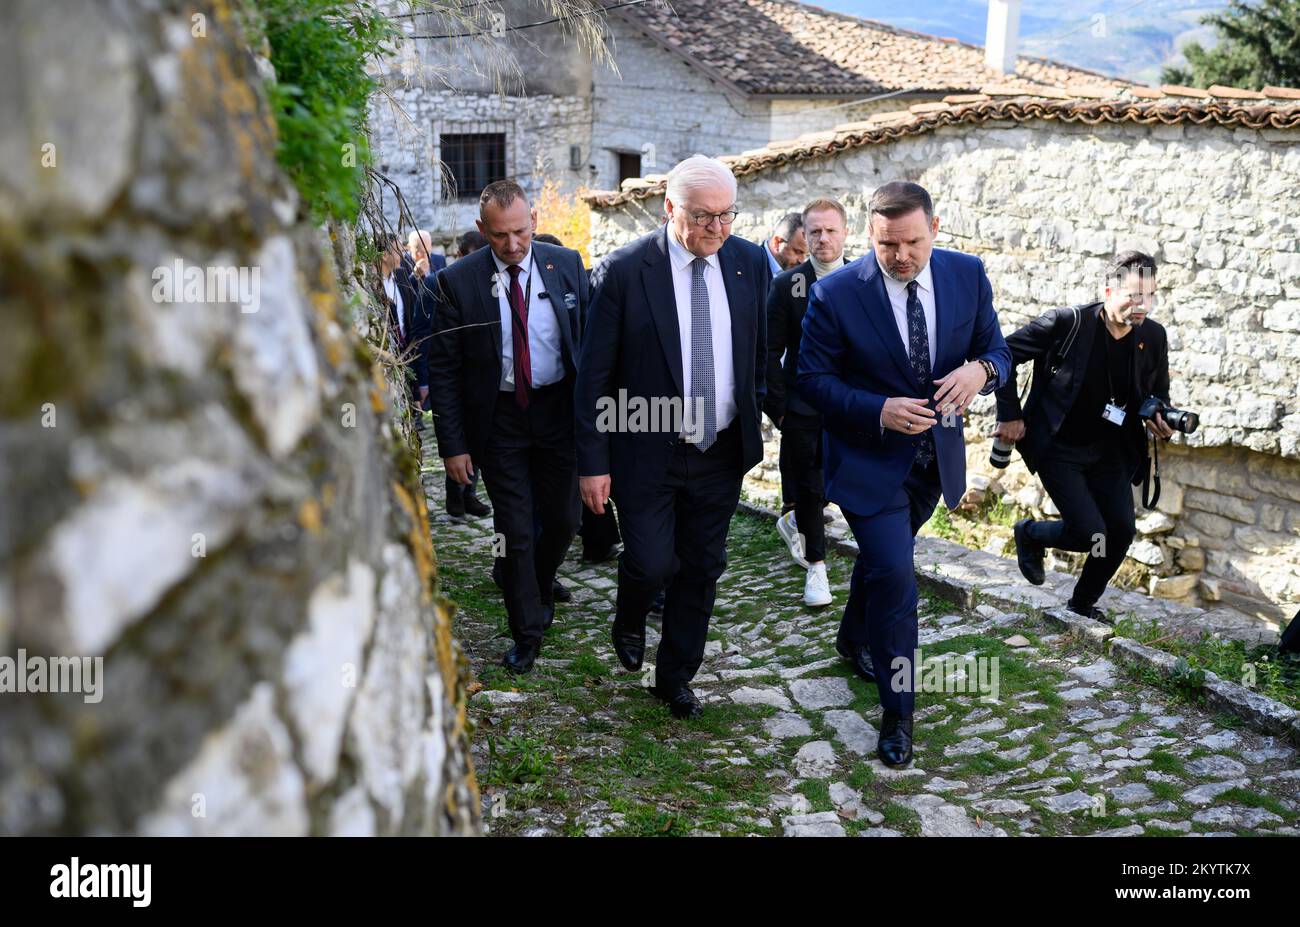 Berat, Albania. 02nd Dec, 2022. German President Frank-Walter Steinmeier (center) is guided through Berat Castle by Ervin Demo (front right), mayor of the city of Berat. President Steinmeier is visiting the countries of northern Macedonia and Albania on his four-day trip to the Balkans. Credit: Bernd von Jutrczenka/dpa/Alamy Live News Stock Photo